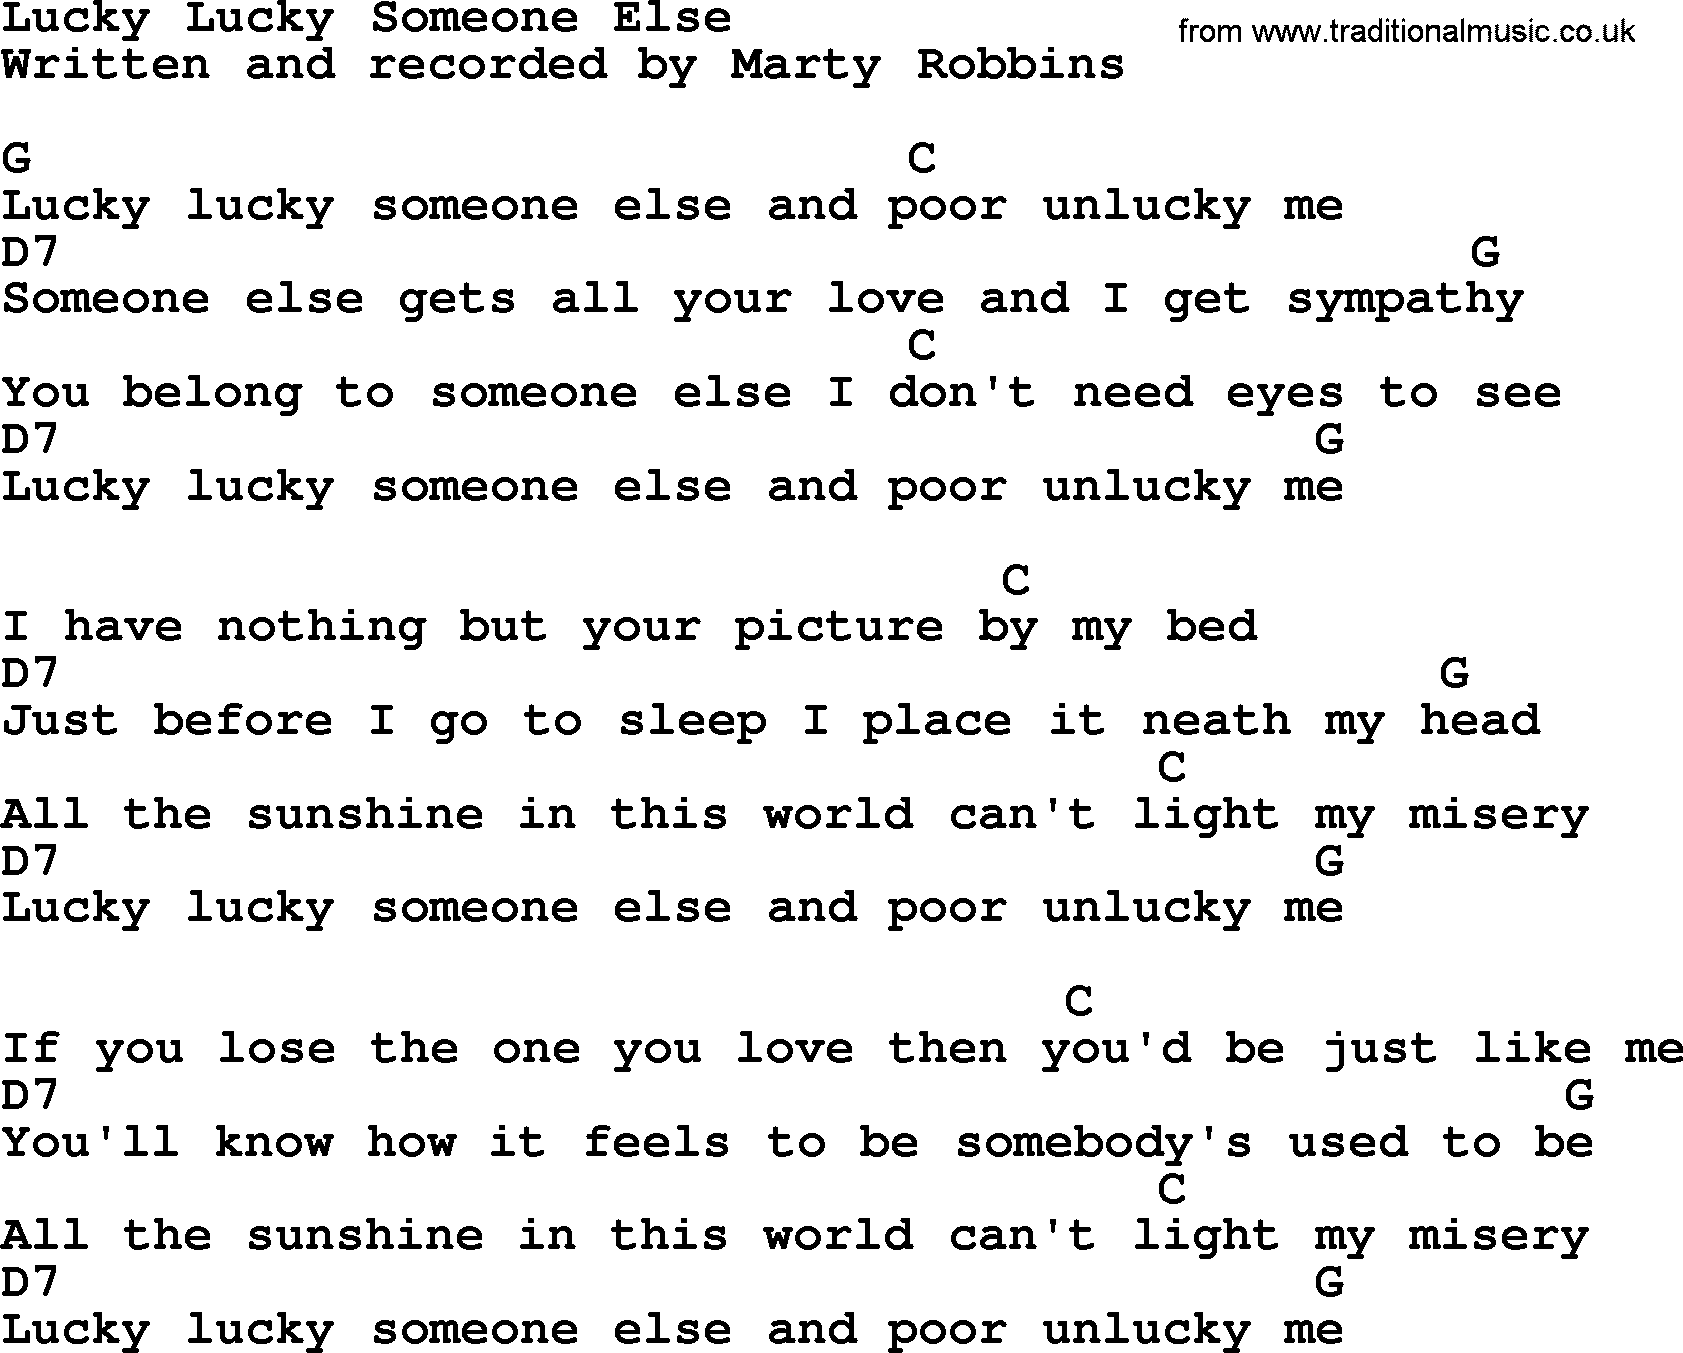 Marty Robbins song: Lucky Lucky Someone Else, lyrics and chords